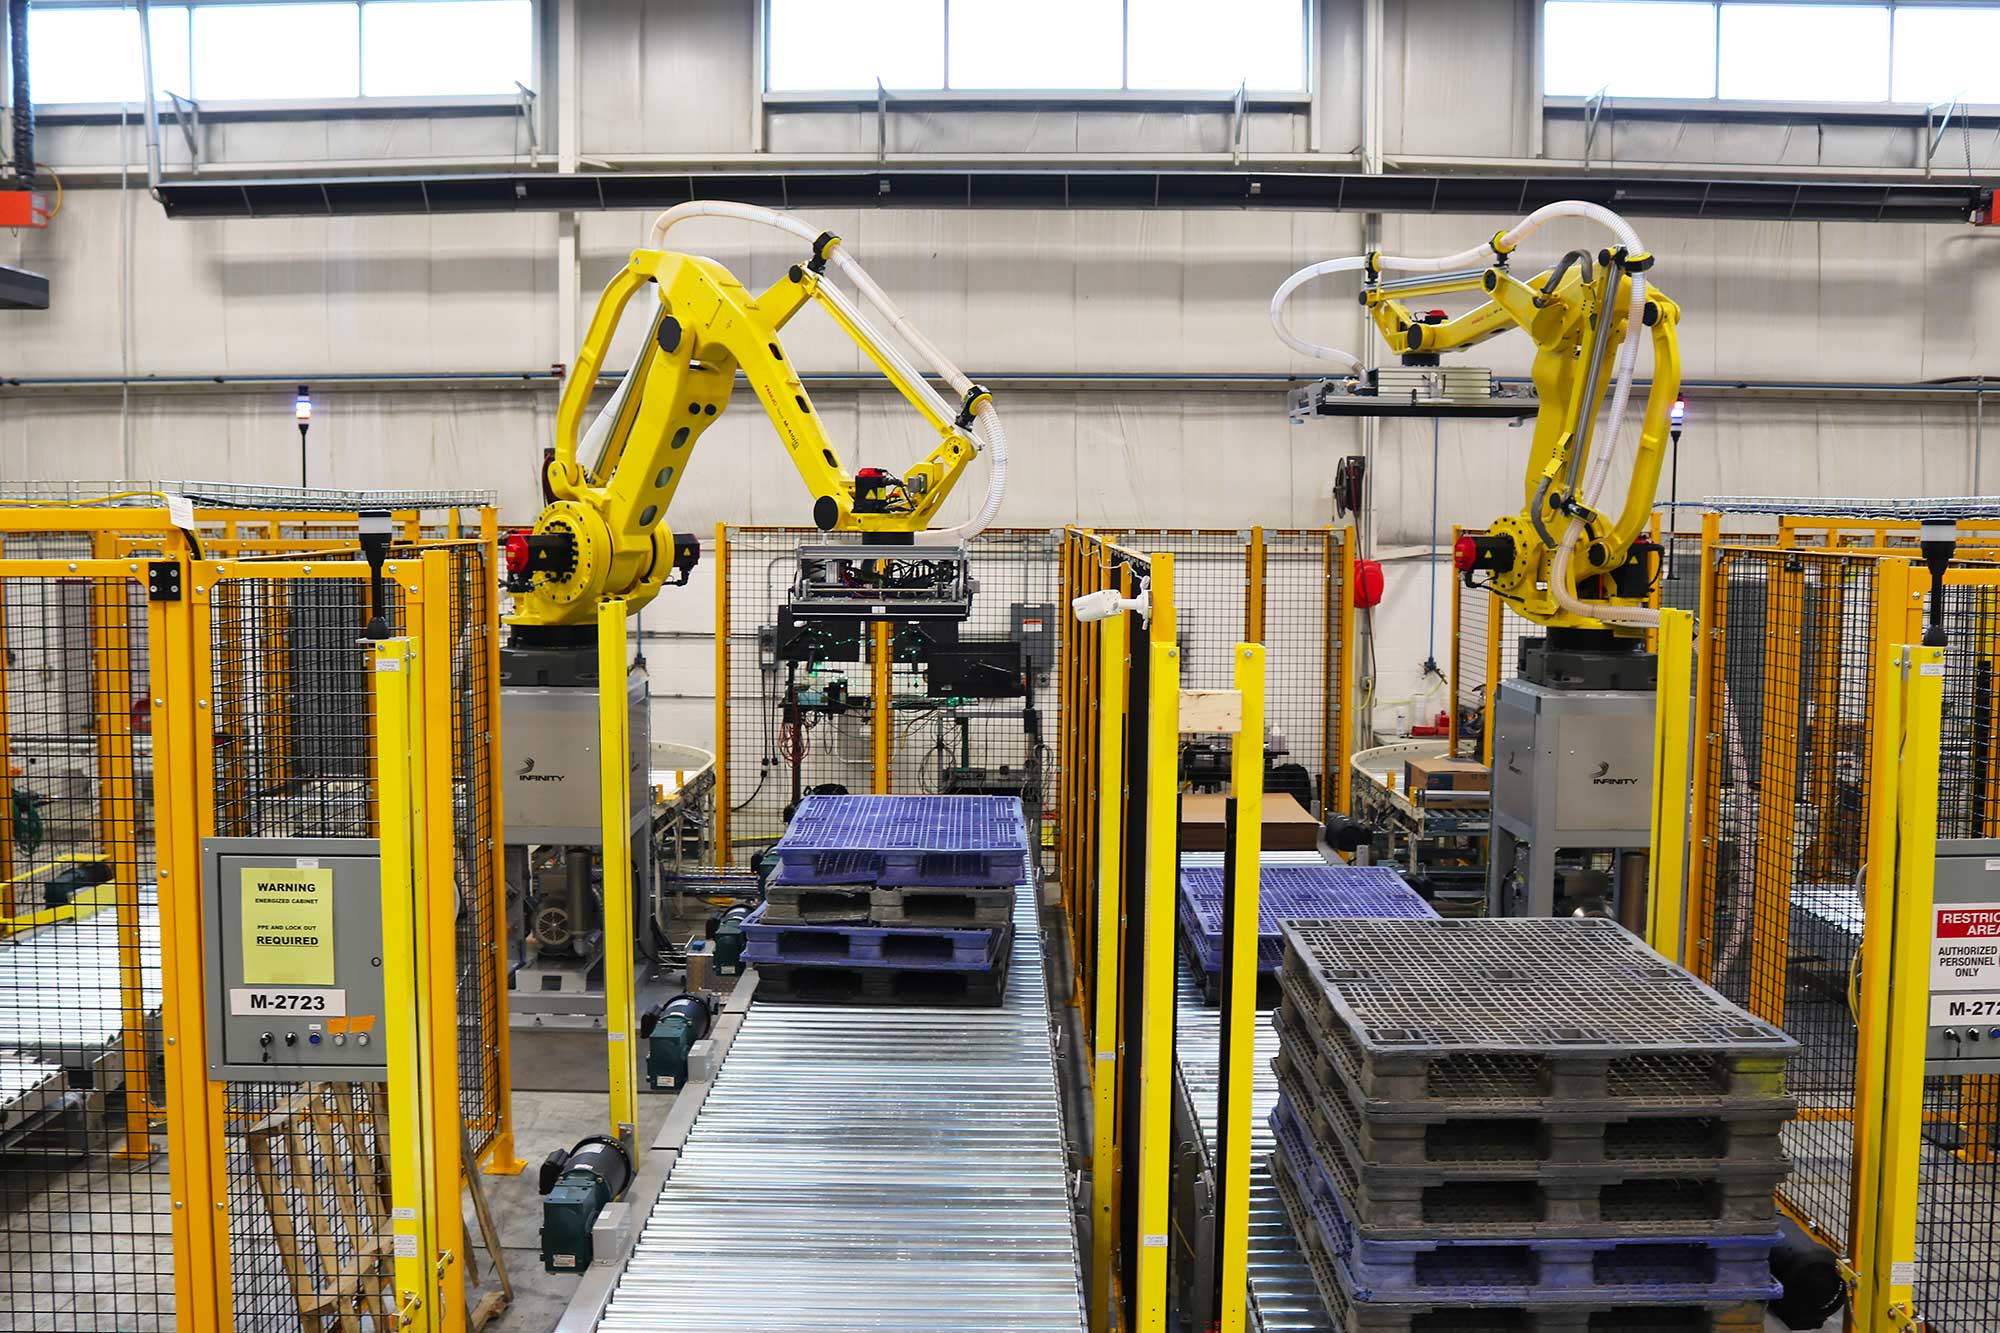 Quick cycle times and robust performance: the R10SW palletiser comes equipped with an articulated robot arm from FANUC